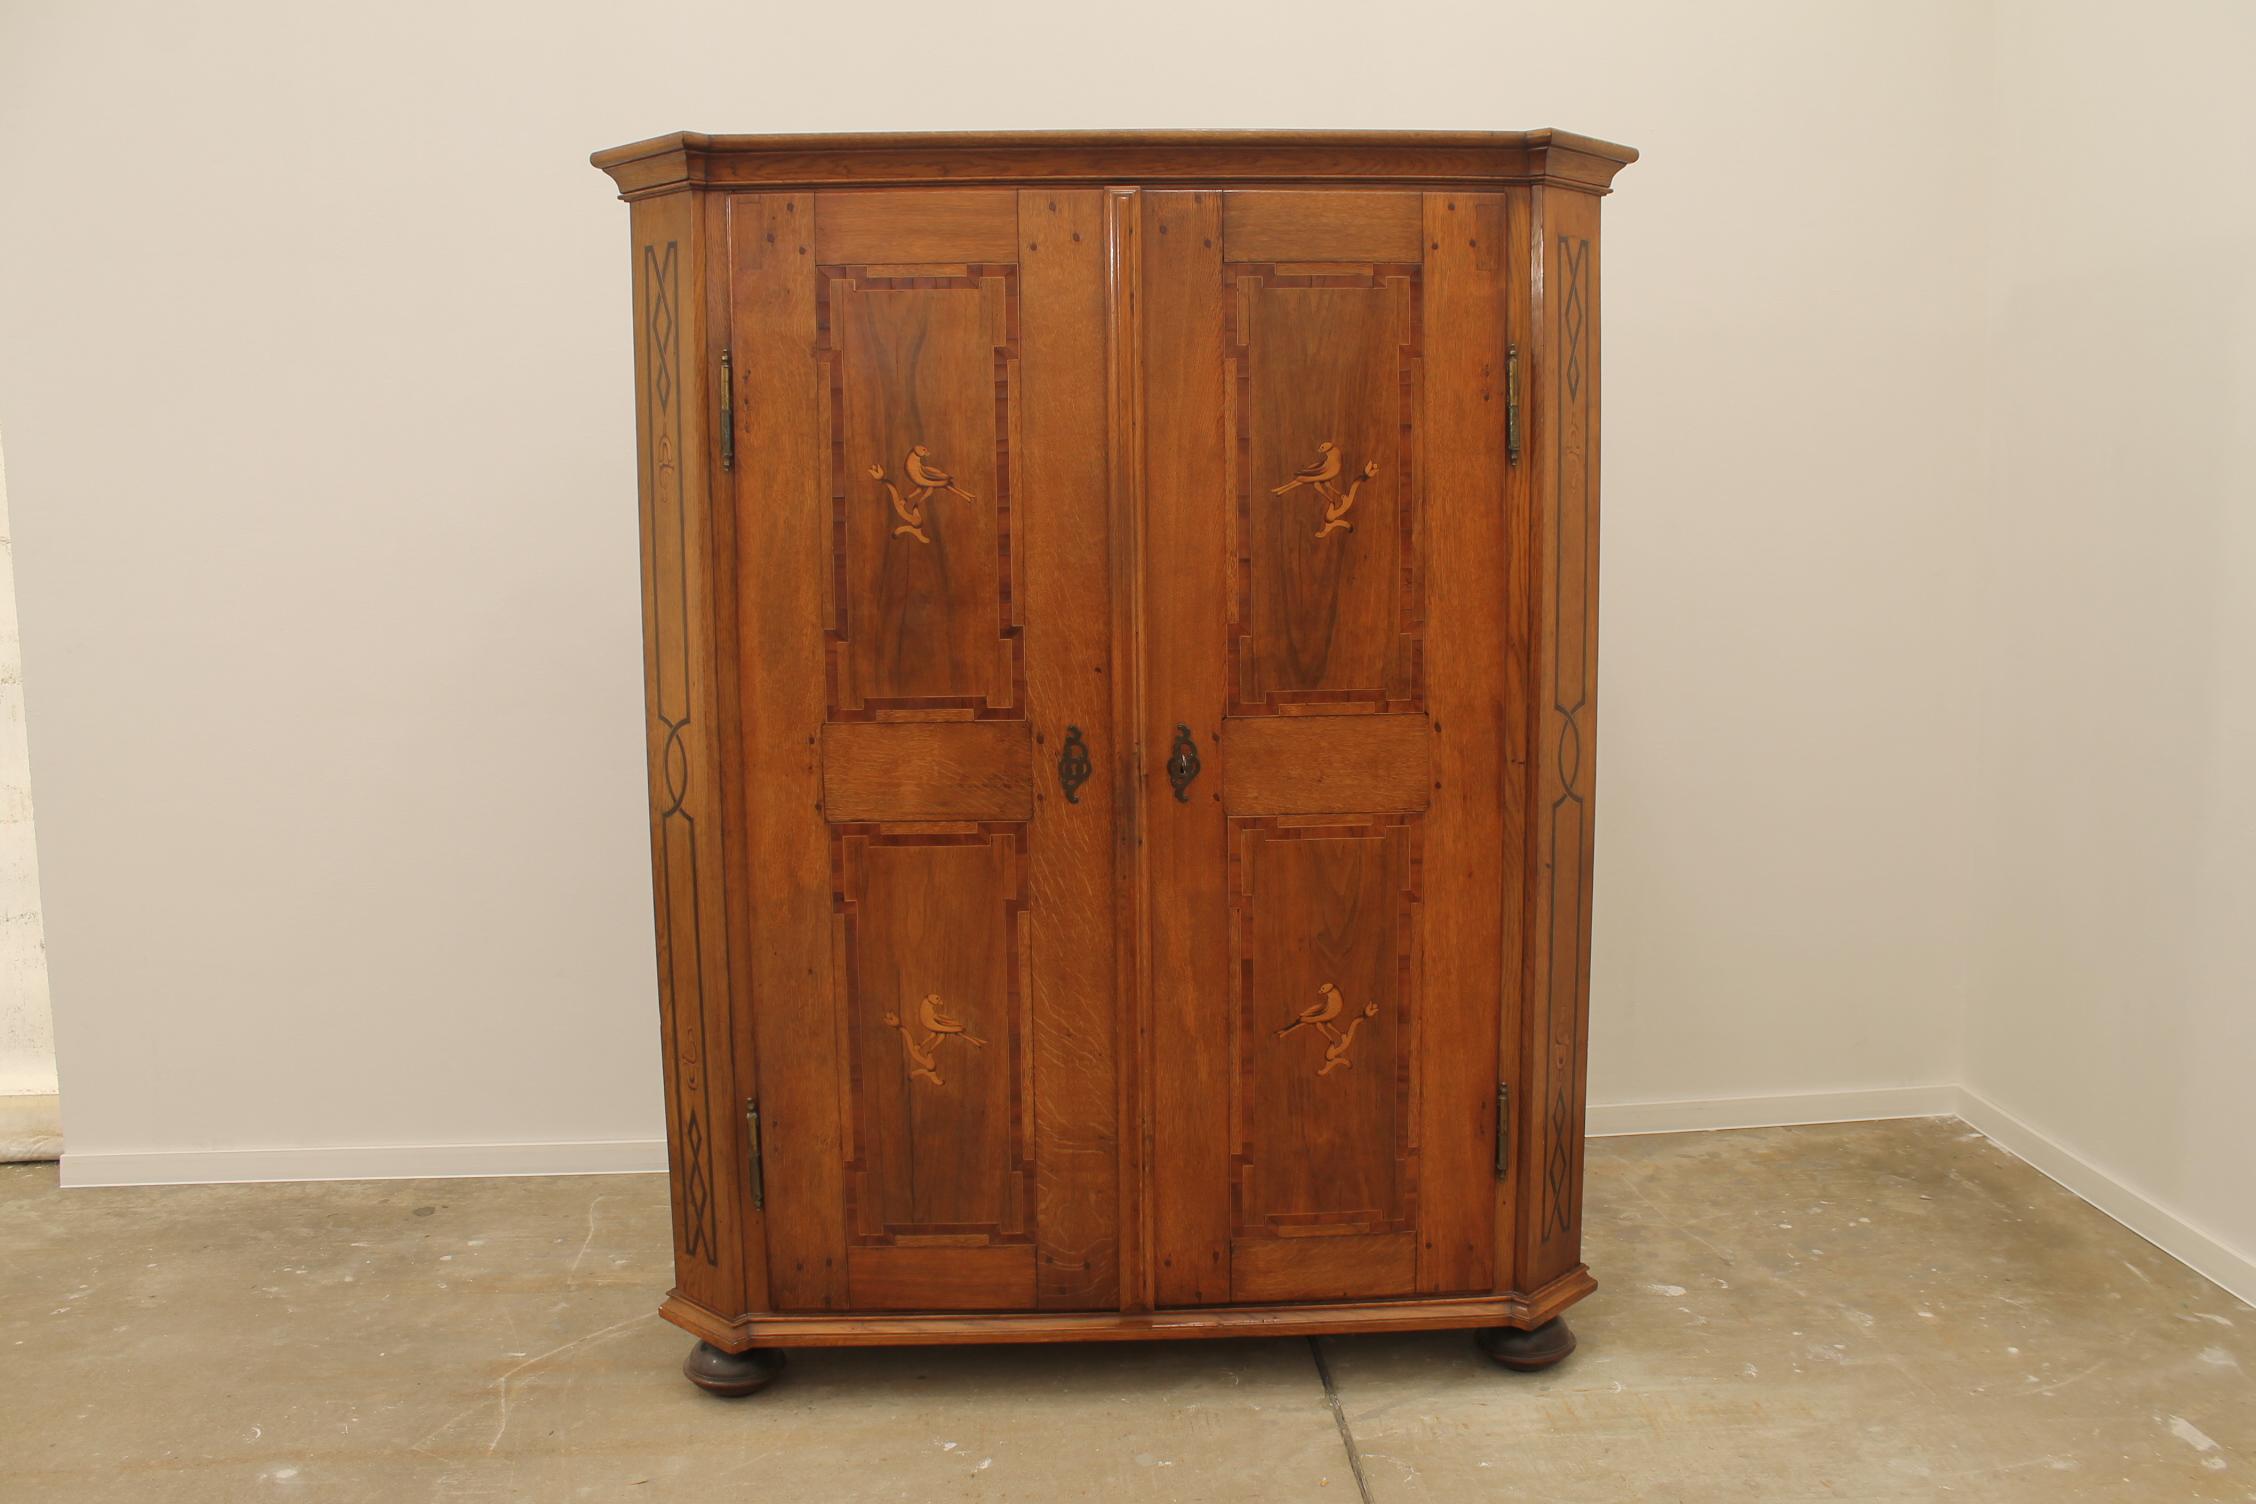 Original Baroque wardrobe from the late 18th century. It was made in the former Austro-Hungarian Empire.  The wardrobe features an original fittings, original Baroque lock. The wardrobe is made of oak solid wood with walnut inlay. It is in very well